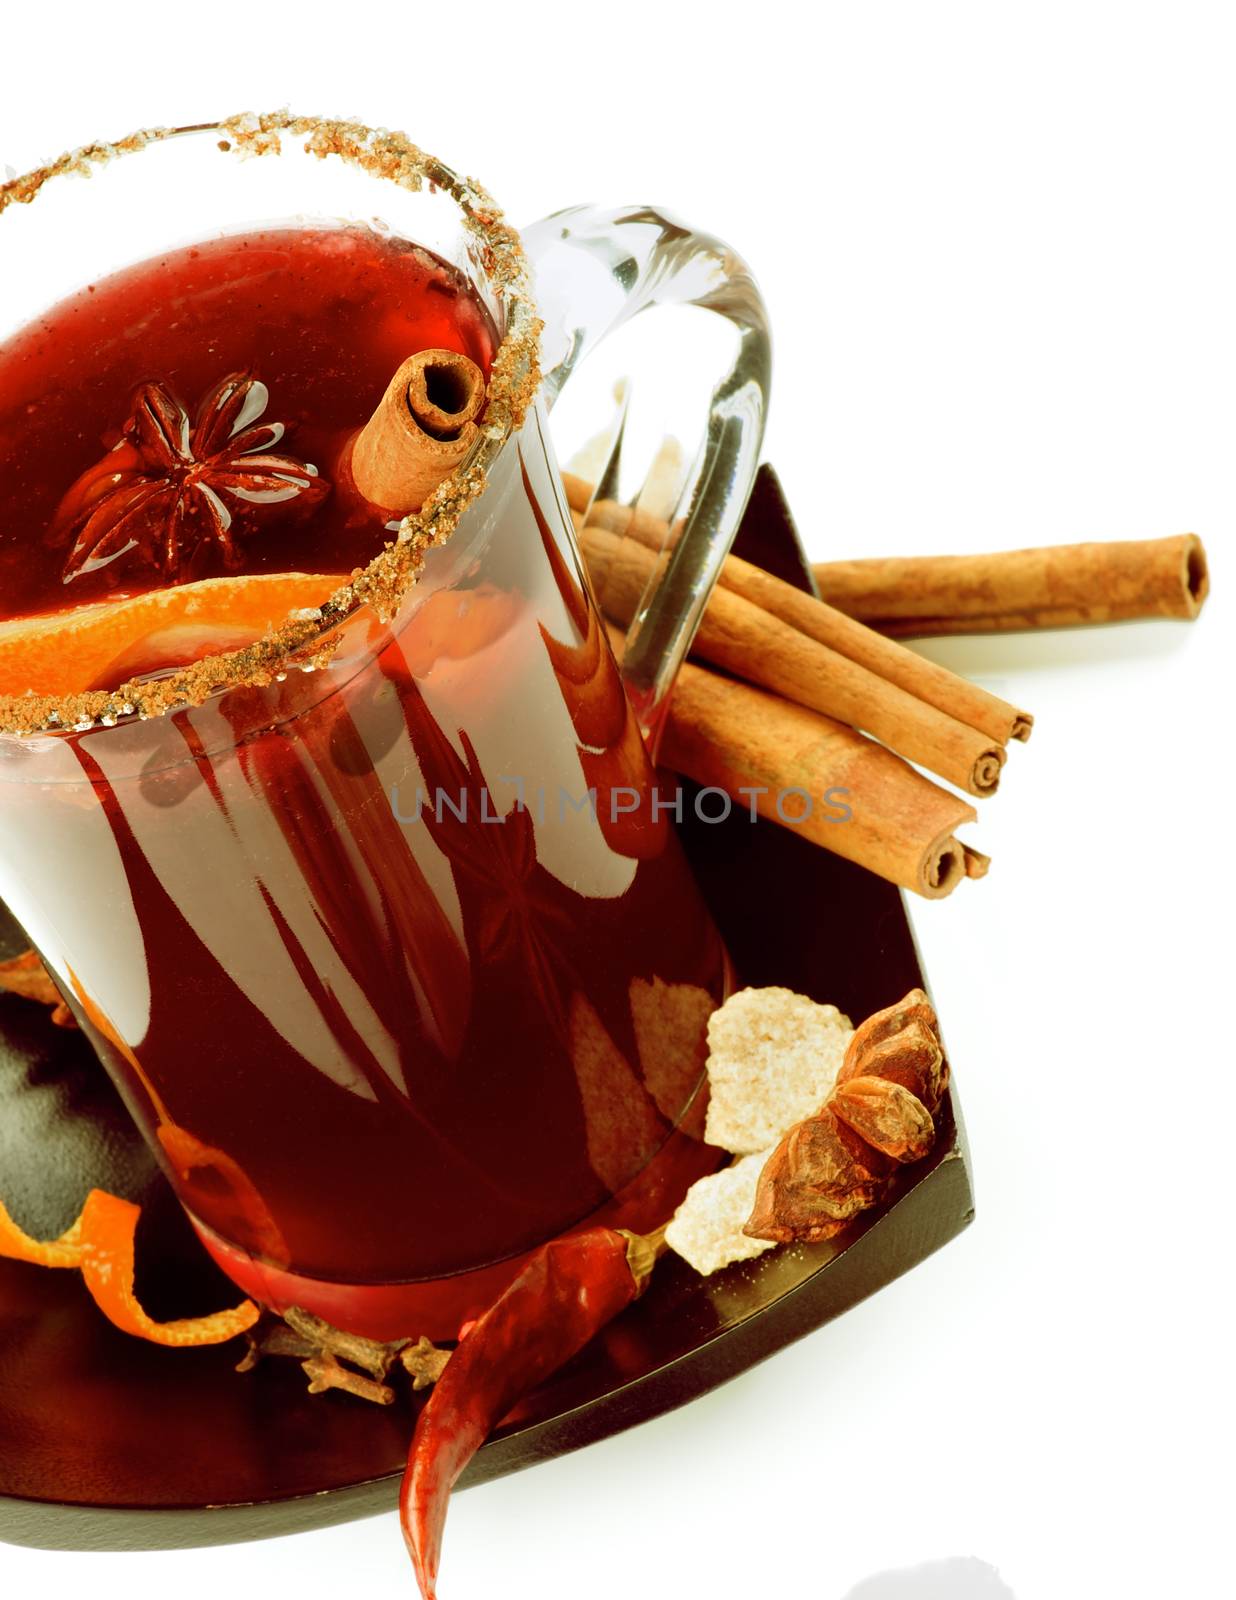 Glass Cup of Mulled Wine with Cinnamon Stick, Slice of Orange and Spices on Black Saucer closeup on White background